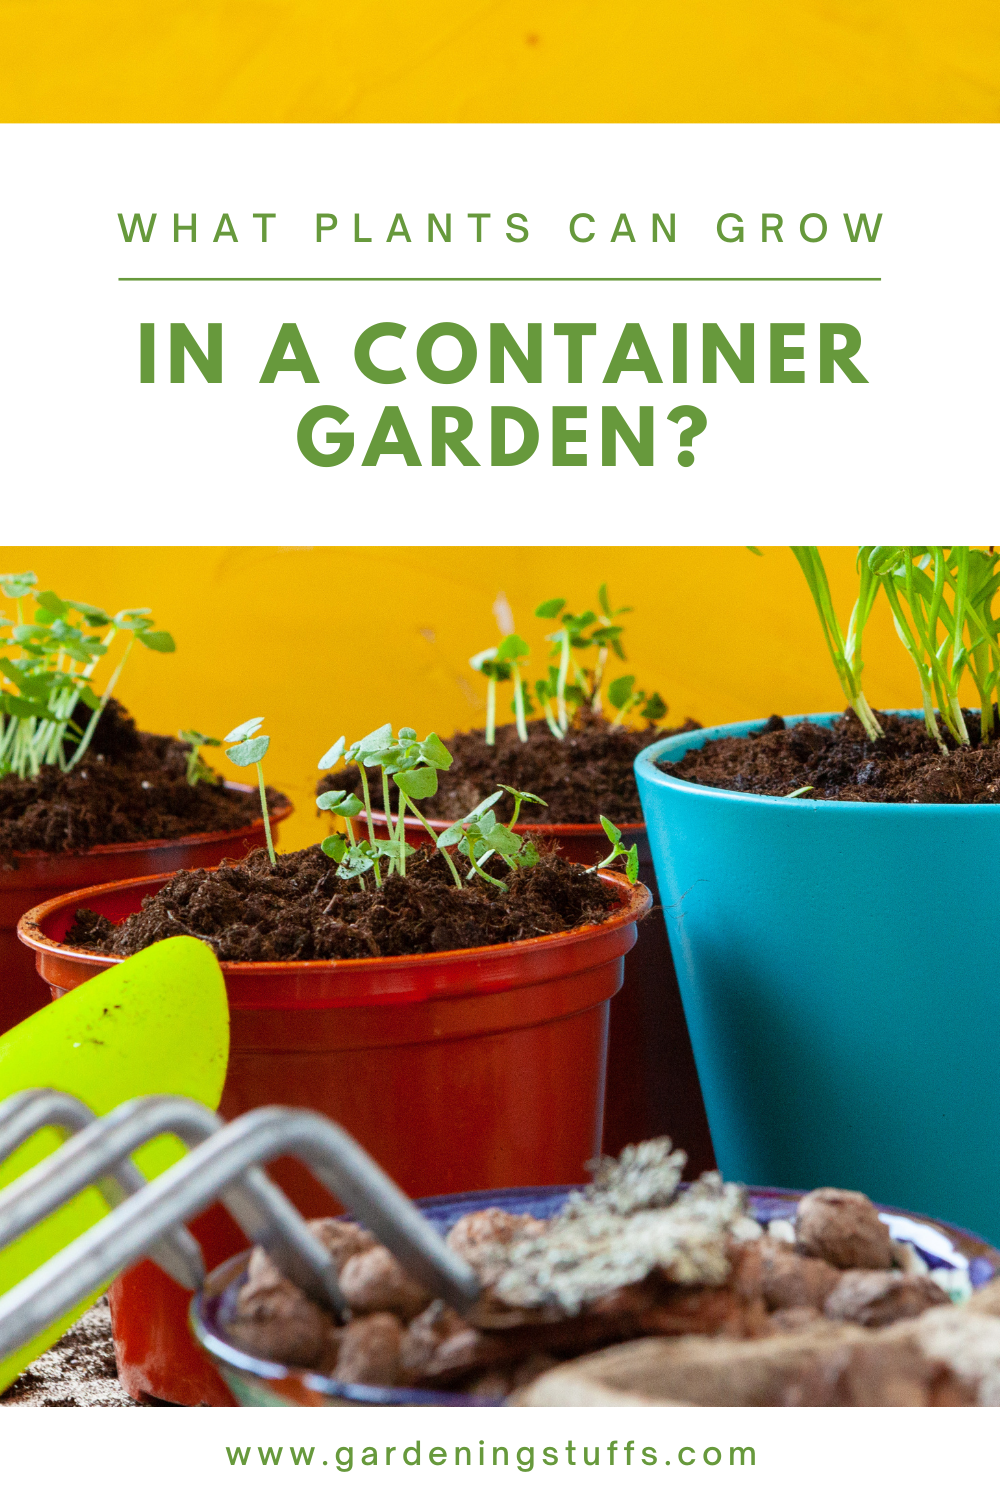 Find out what plants can survive and thrive while grown in containers. These plants may be flowers, herbs, and vegetables, among others. 